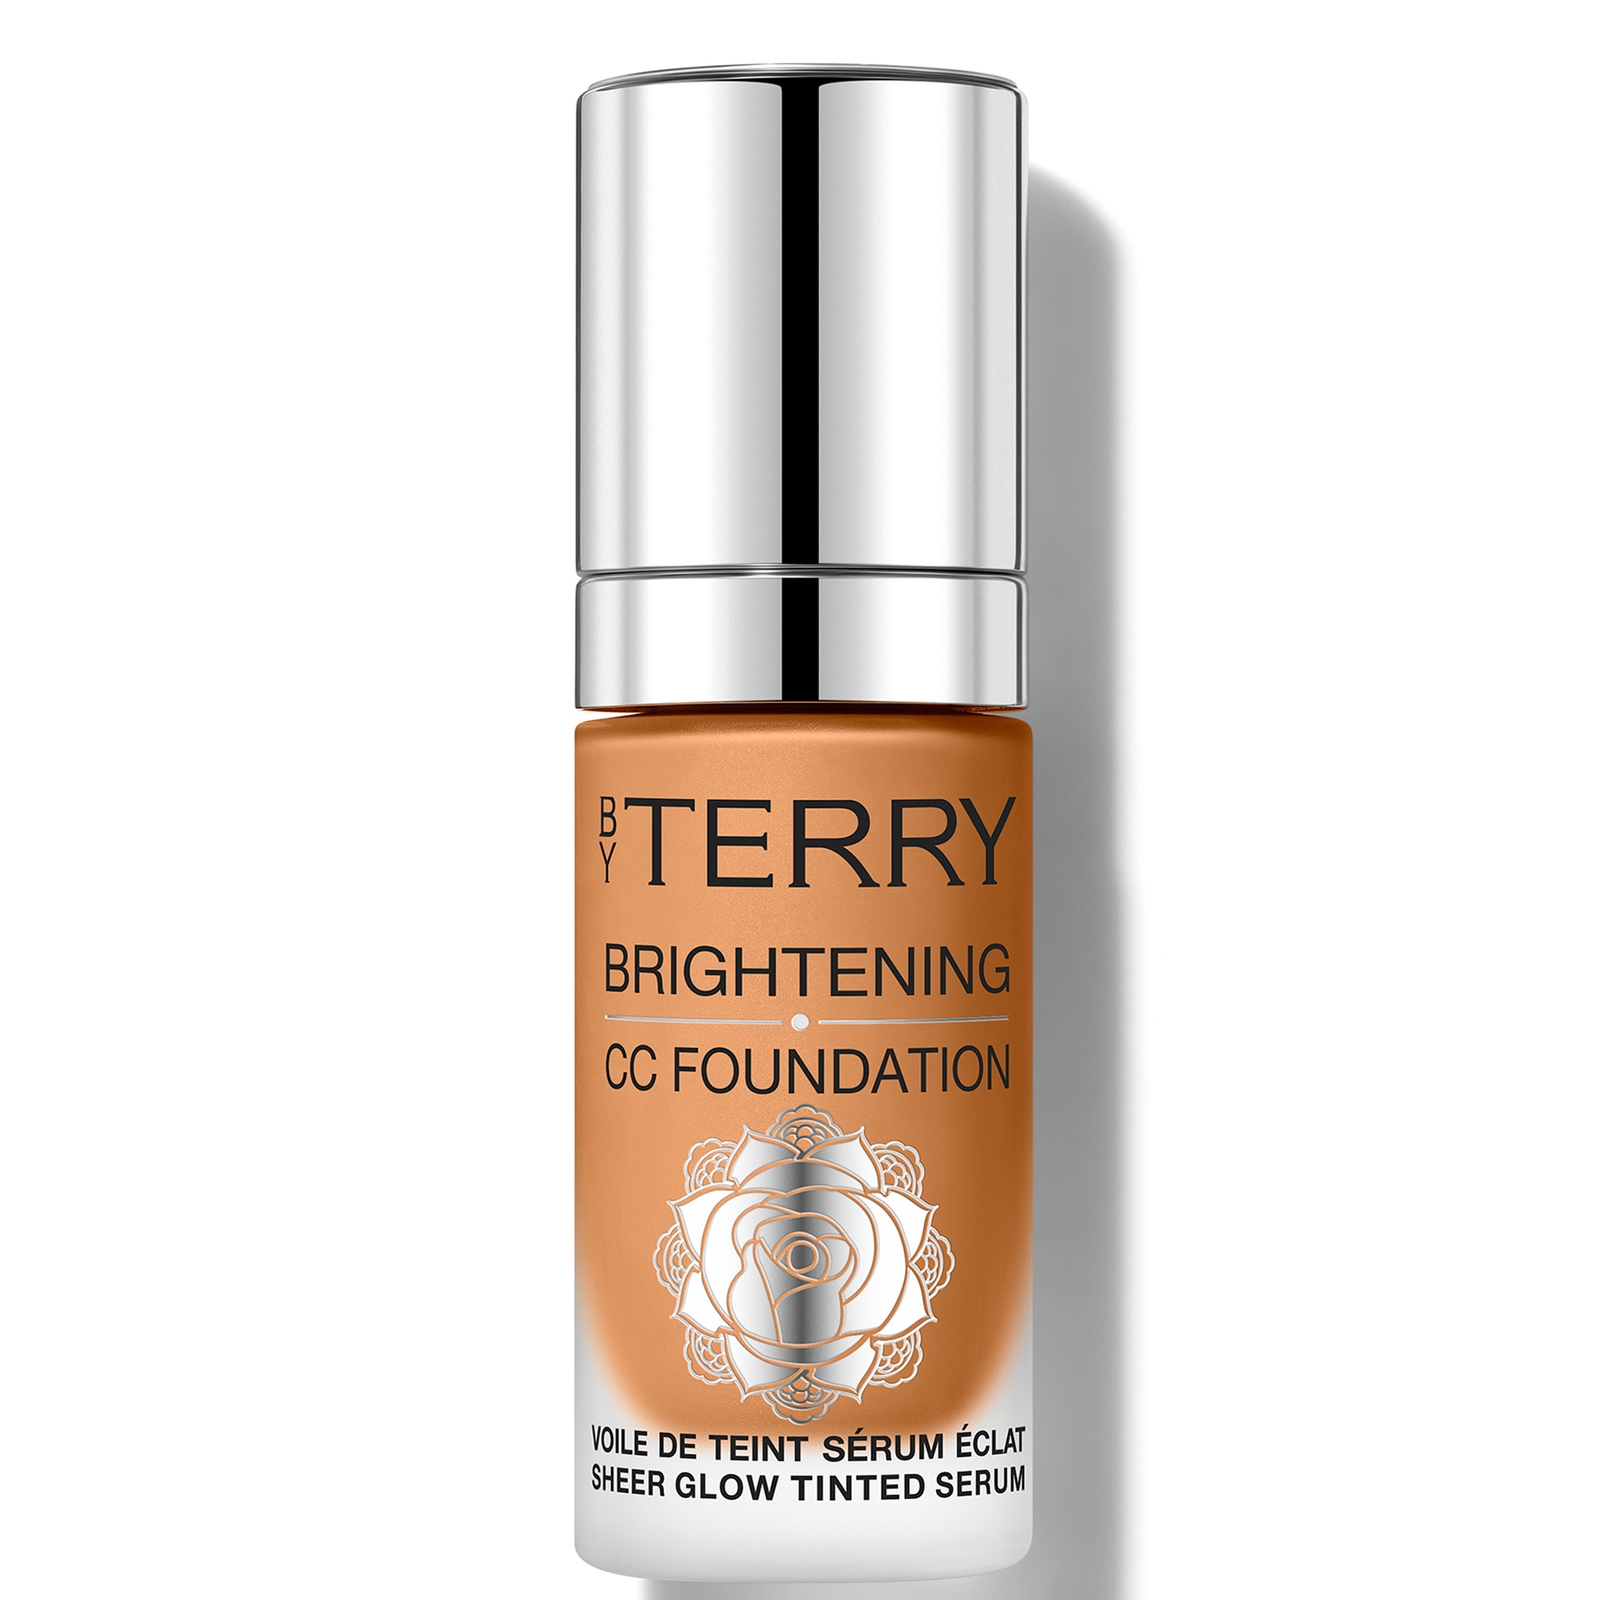 By Terry Brightening Cc Foundation 30ml (various Shades) - 6w - Tan Warm In Neutral